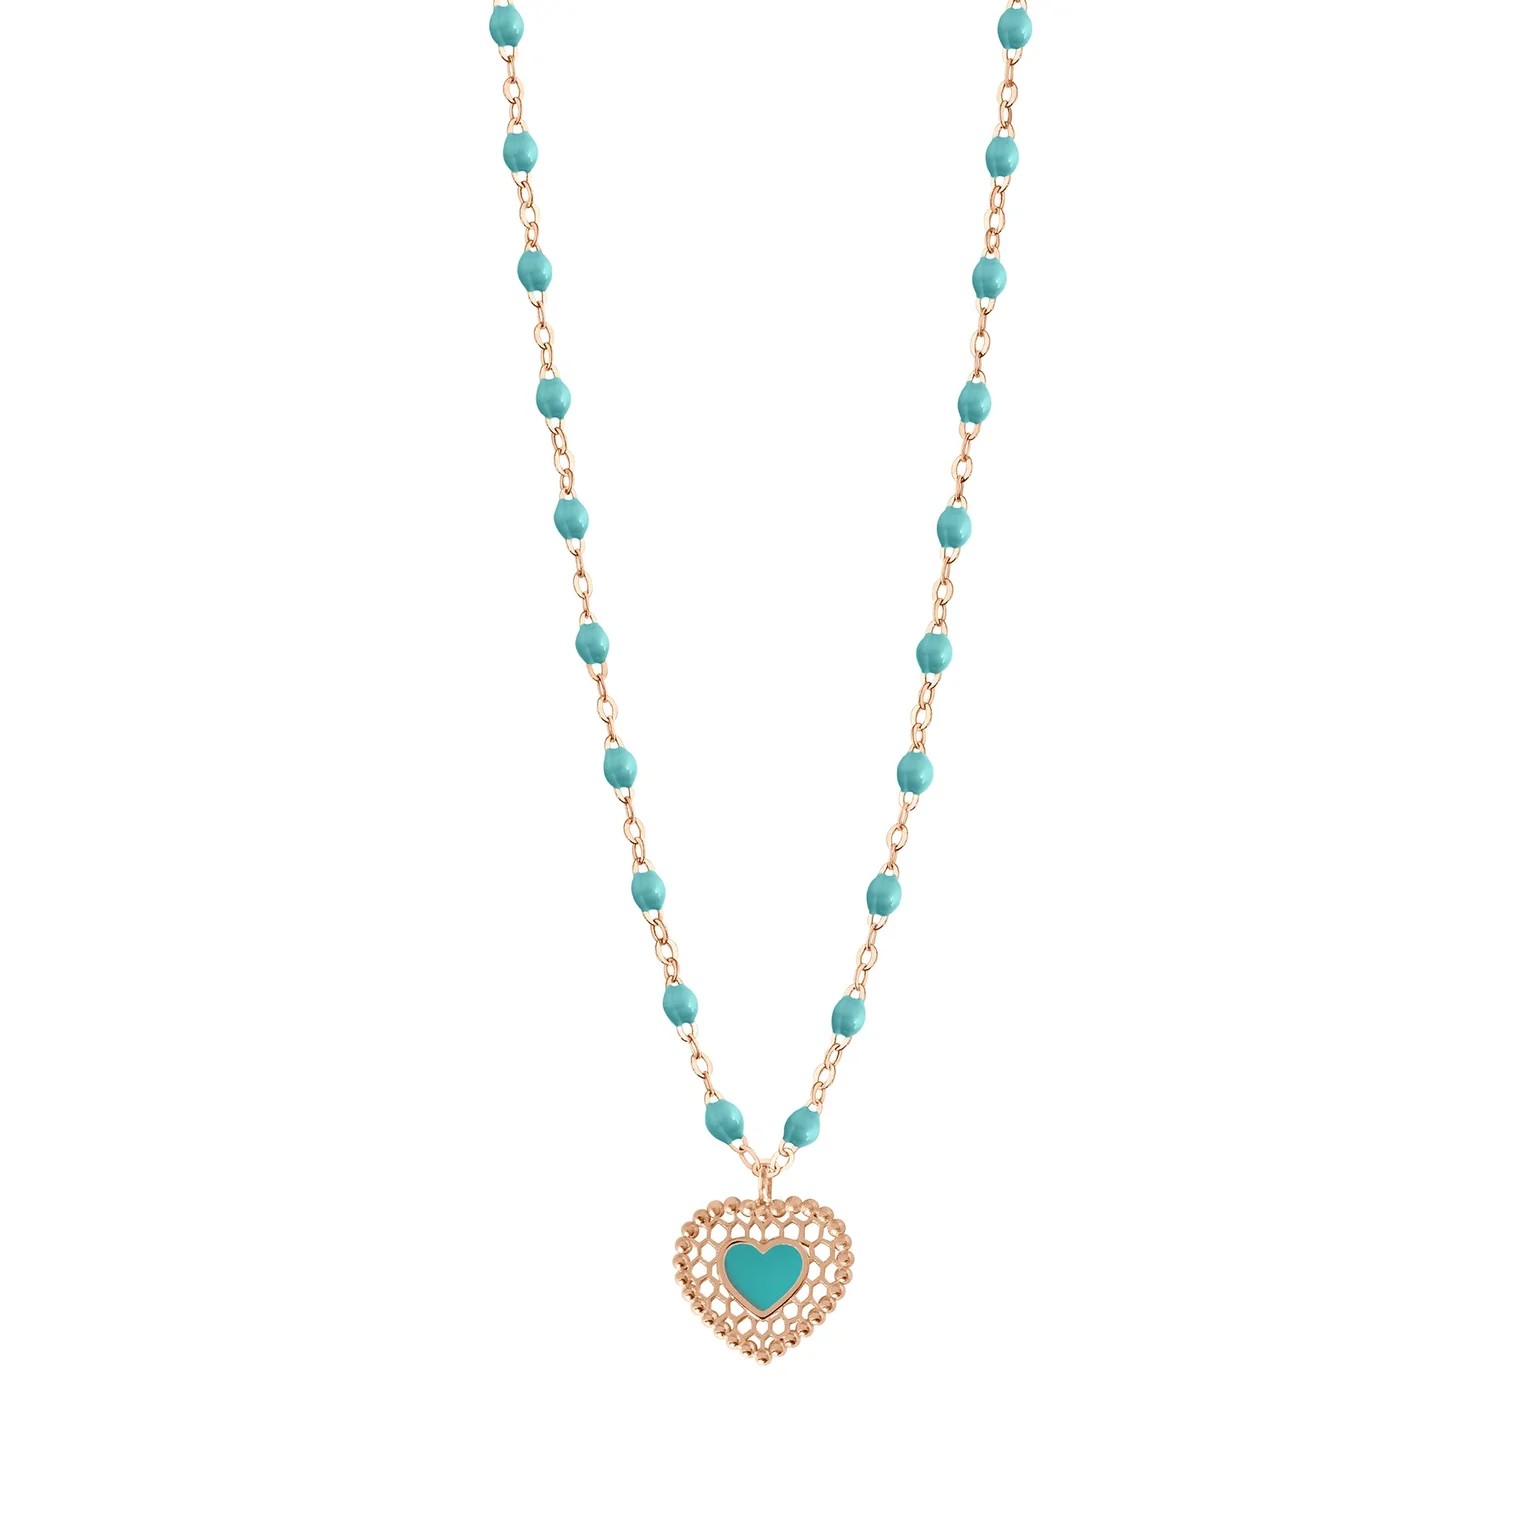 collier-turquoise-coeur-dentelle-or-rose_b1dc001-turquoise-or-rose-0-103818